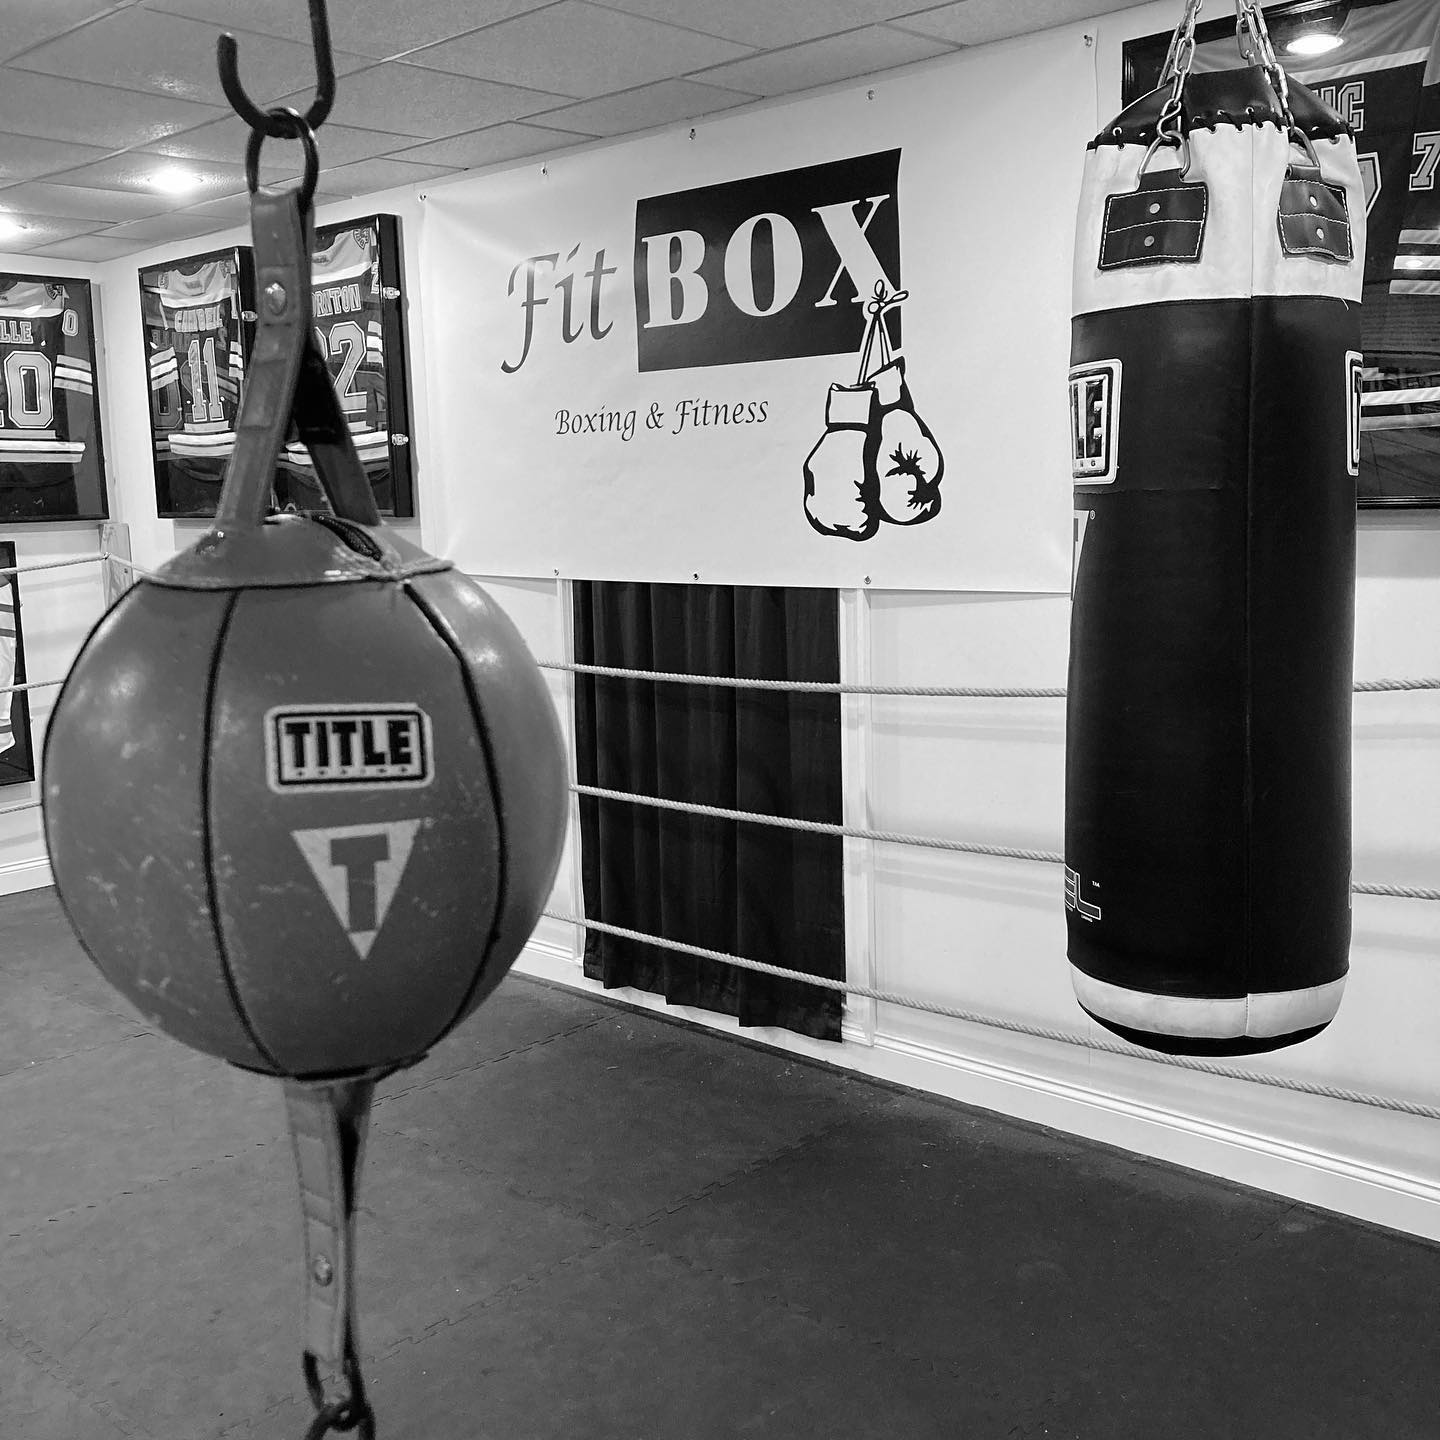 If you have always thought about it , Now’s the time .. Schedule your free boxing session today with @tommymcinerney call/text (781)727-9503 or email fitbox@outlook.com